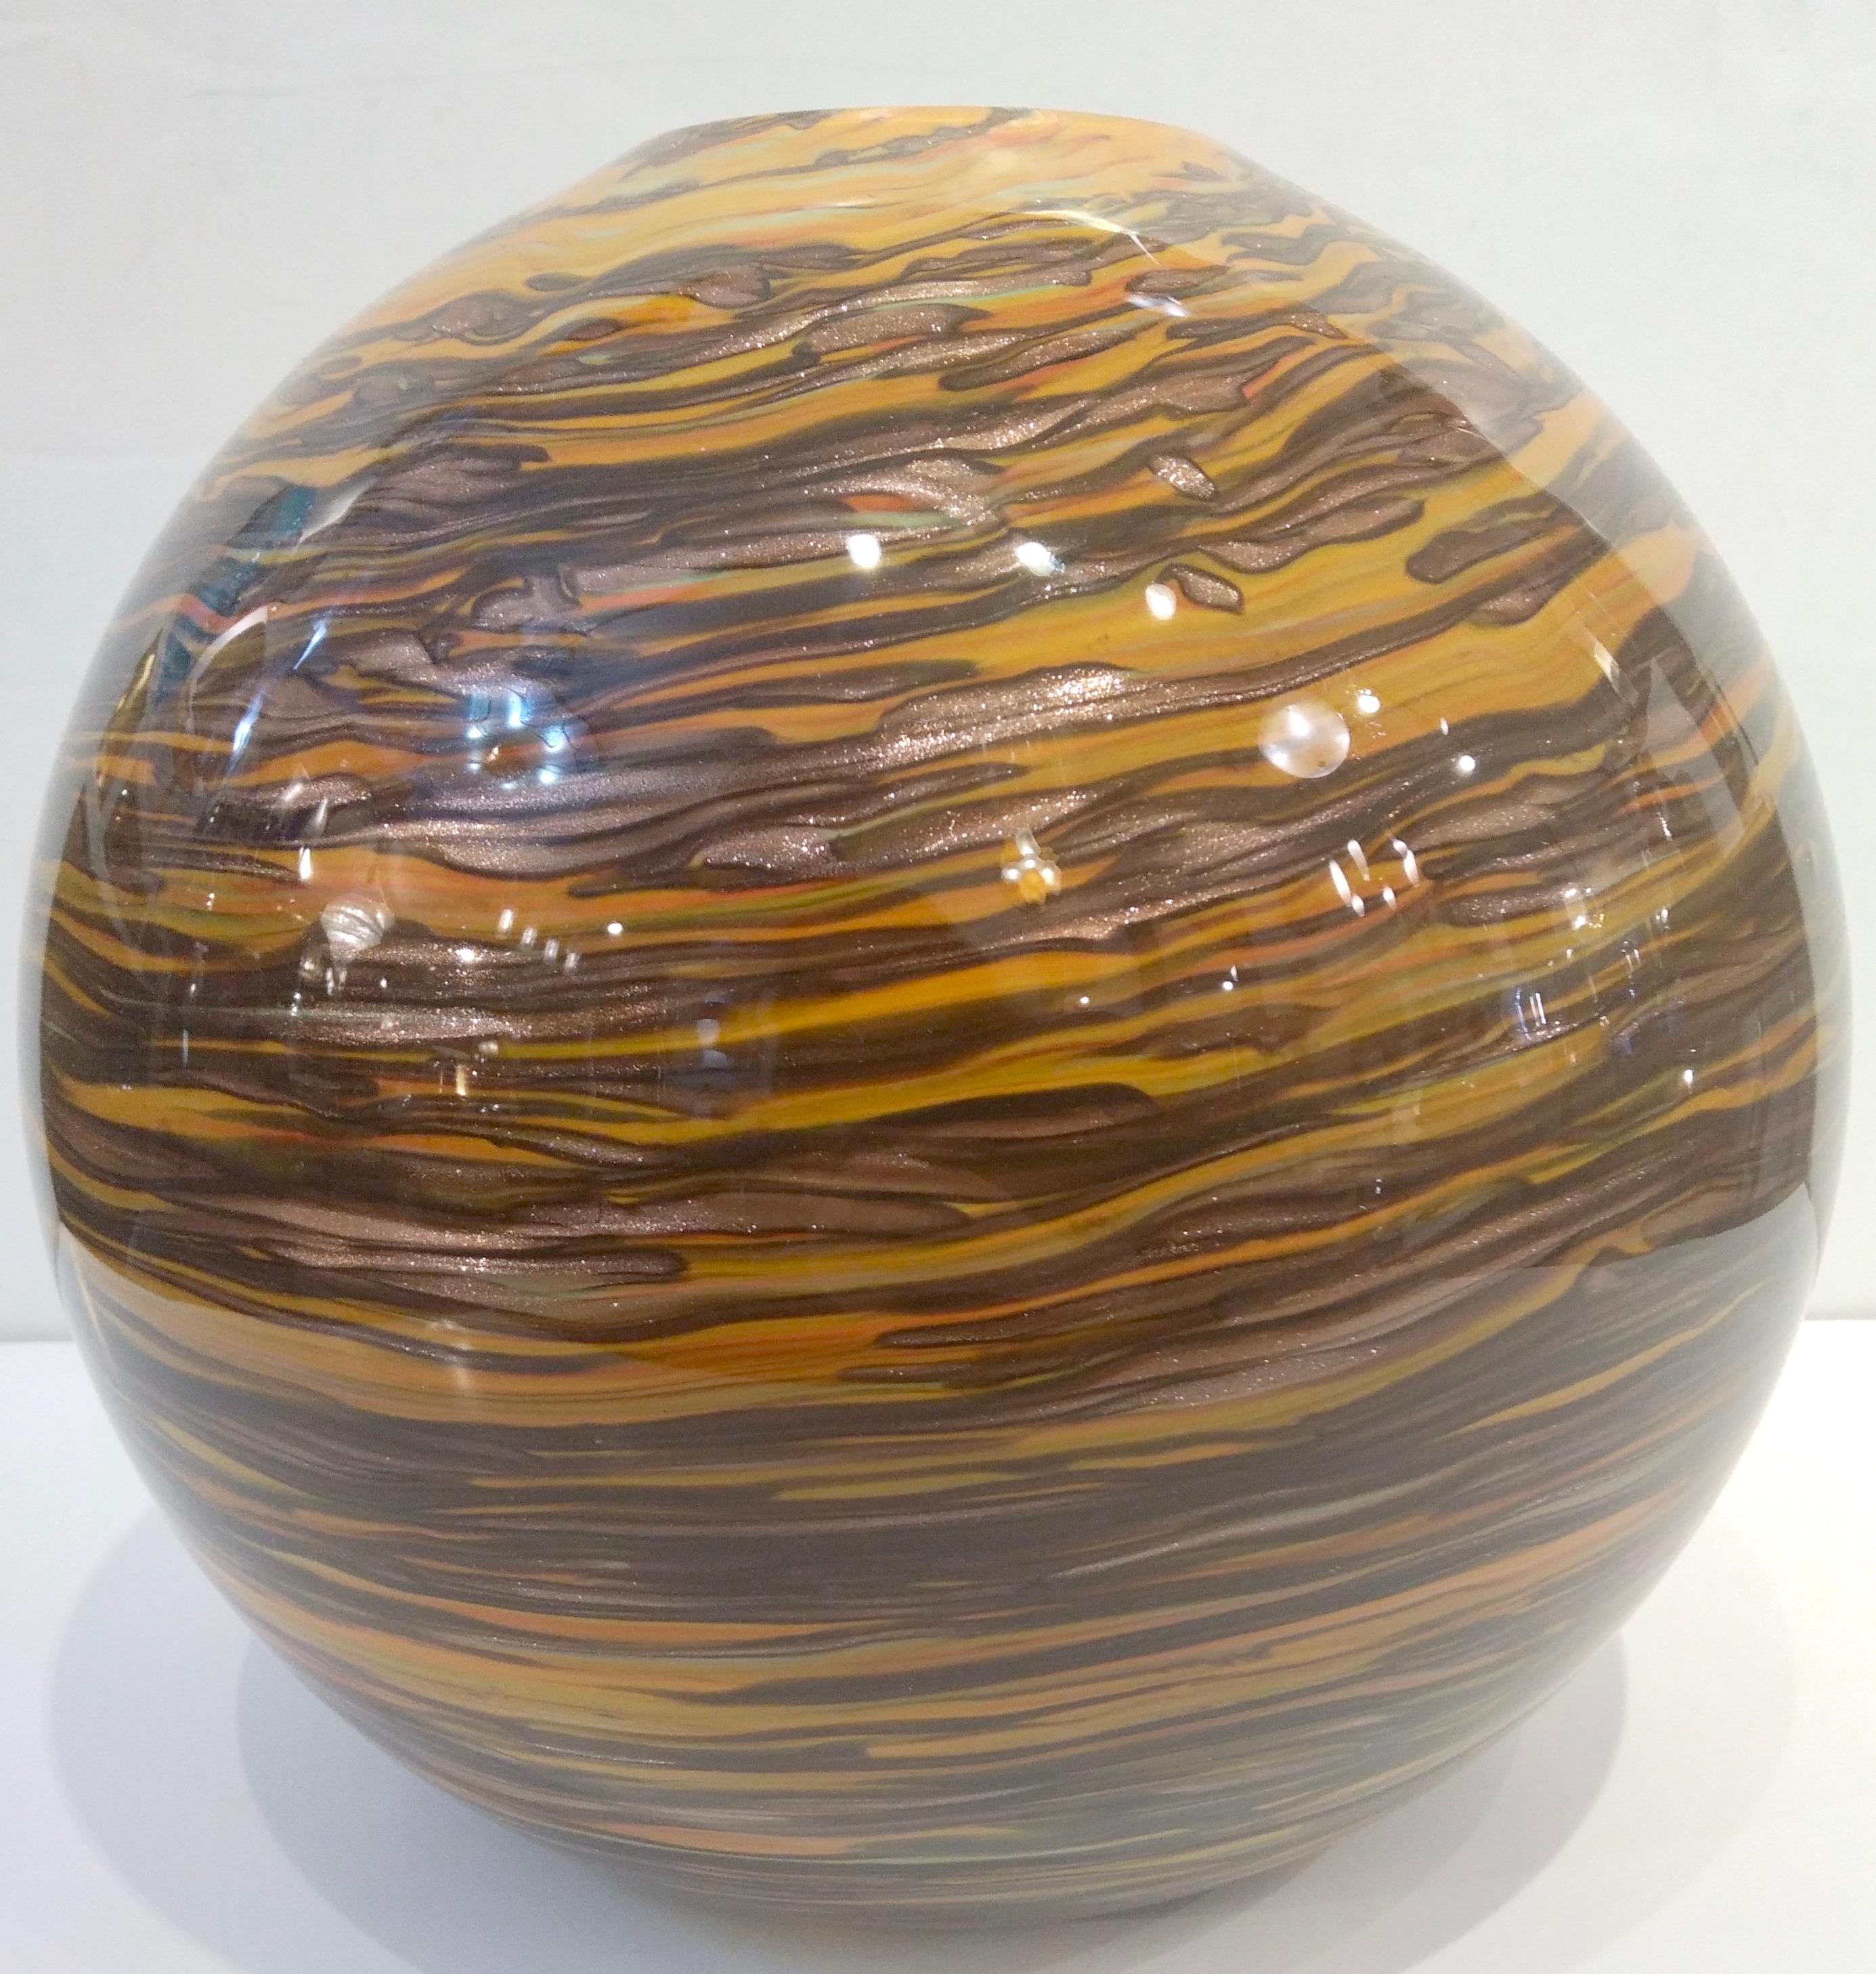 Organic Modern Formia 1980s Modern Round Brown Yellow Red Orange Gold Murano Glass Vase For Sale